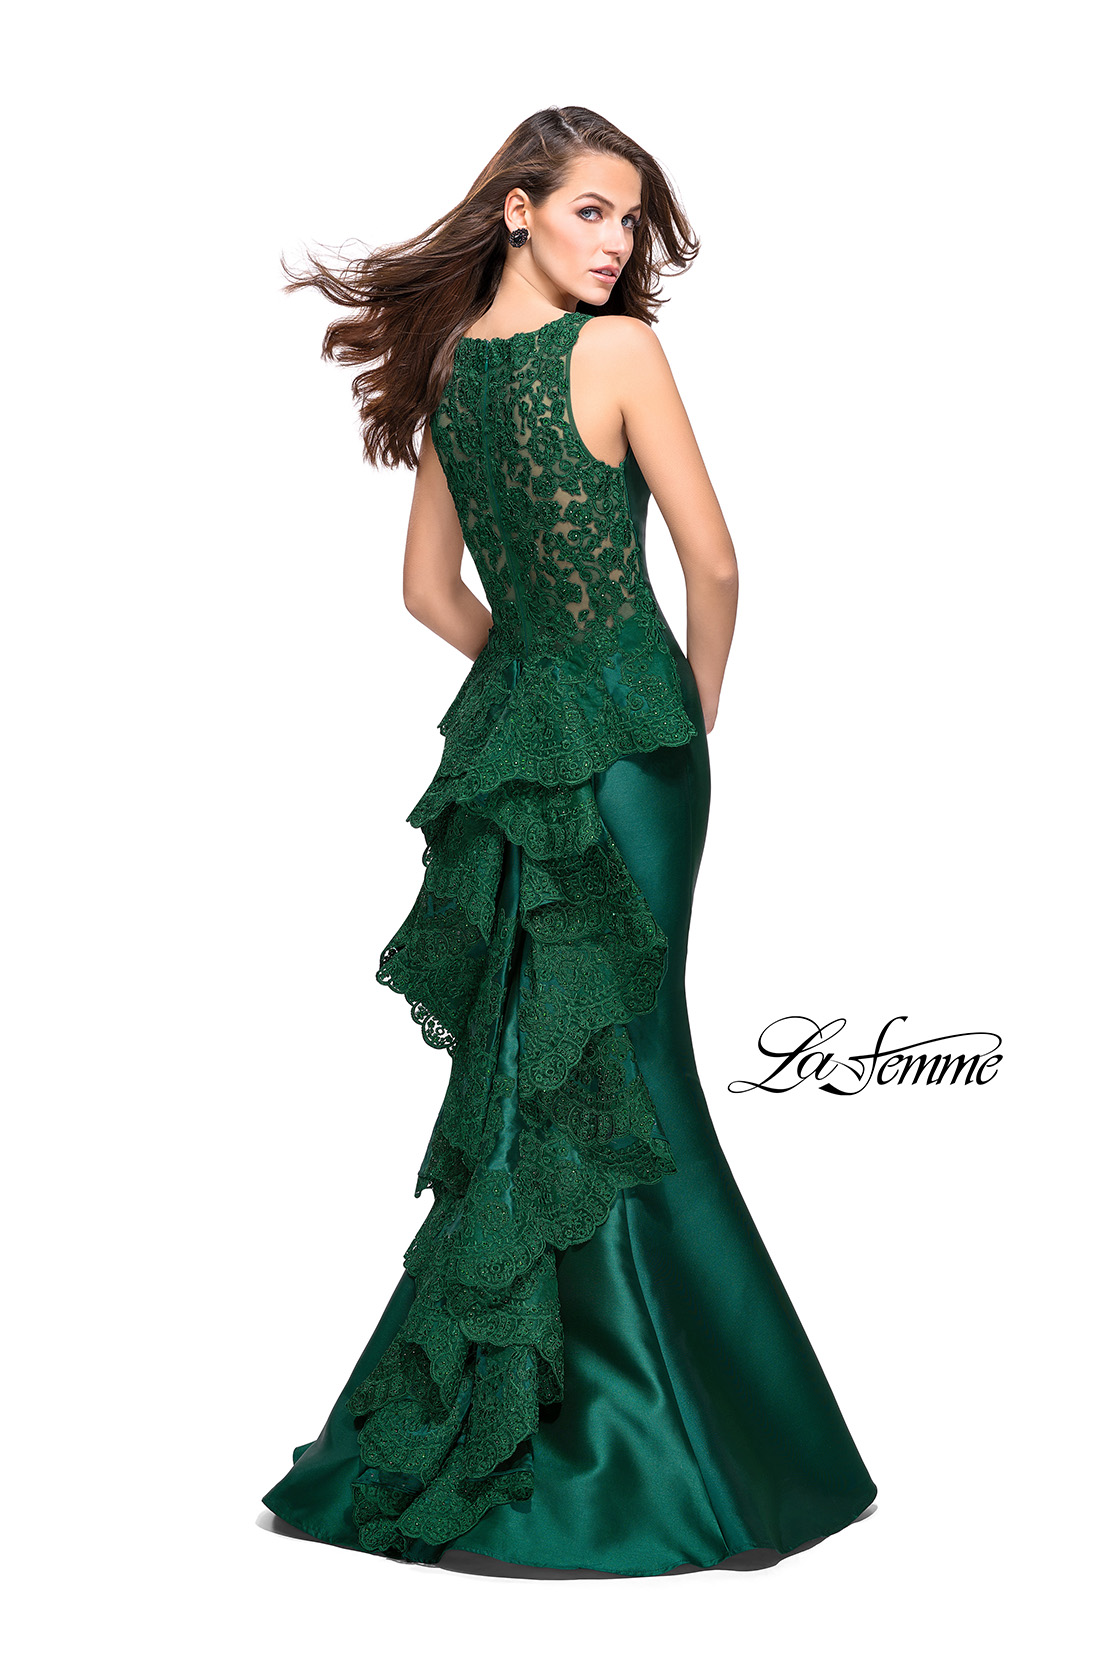 Green Prom Dress by La Femme with Lace Back and Mermaid Skirt